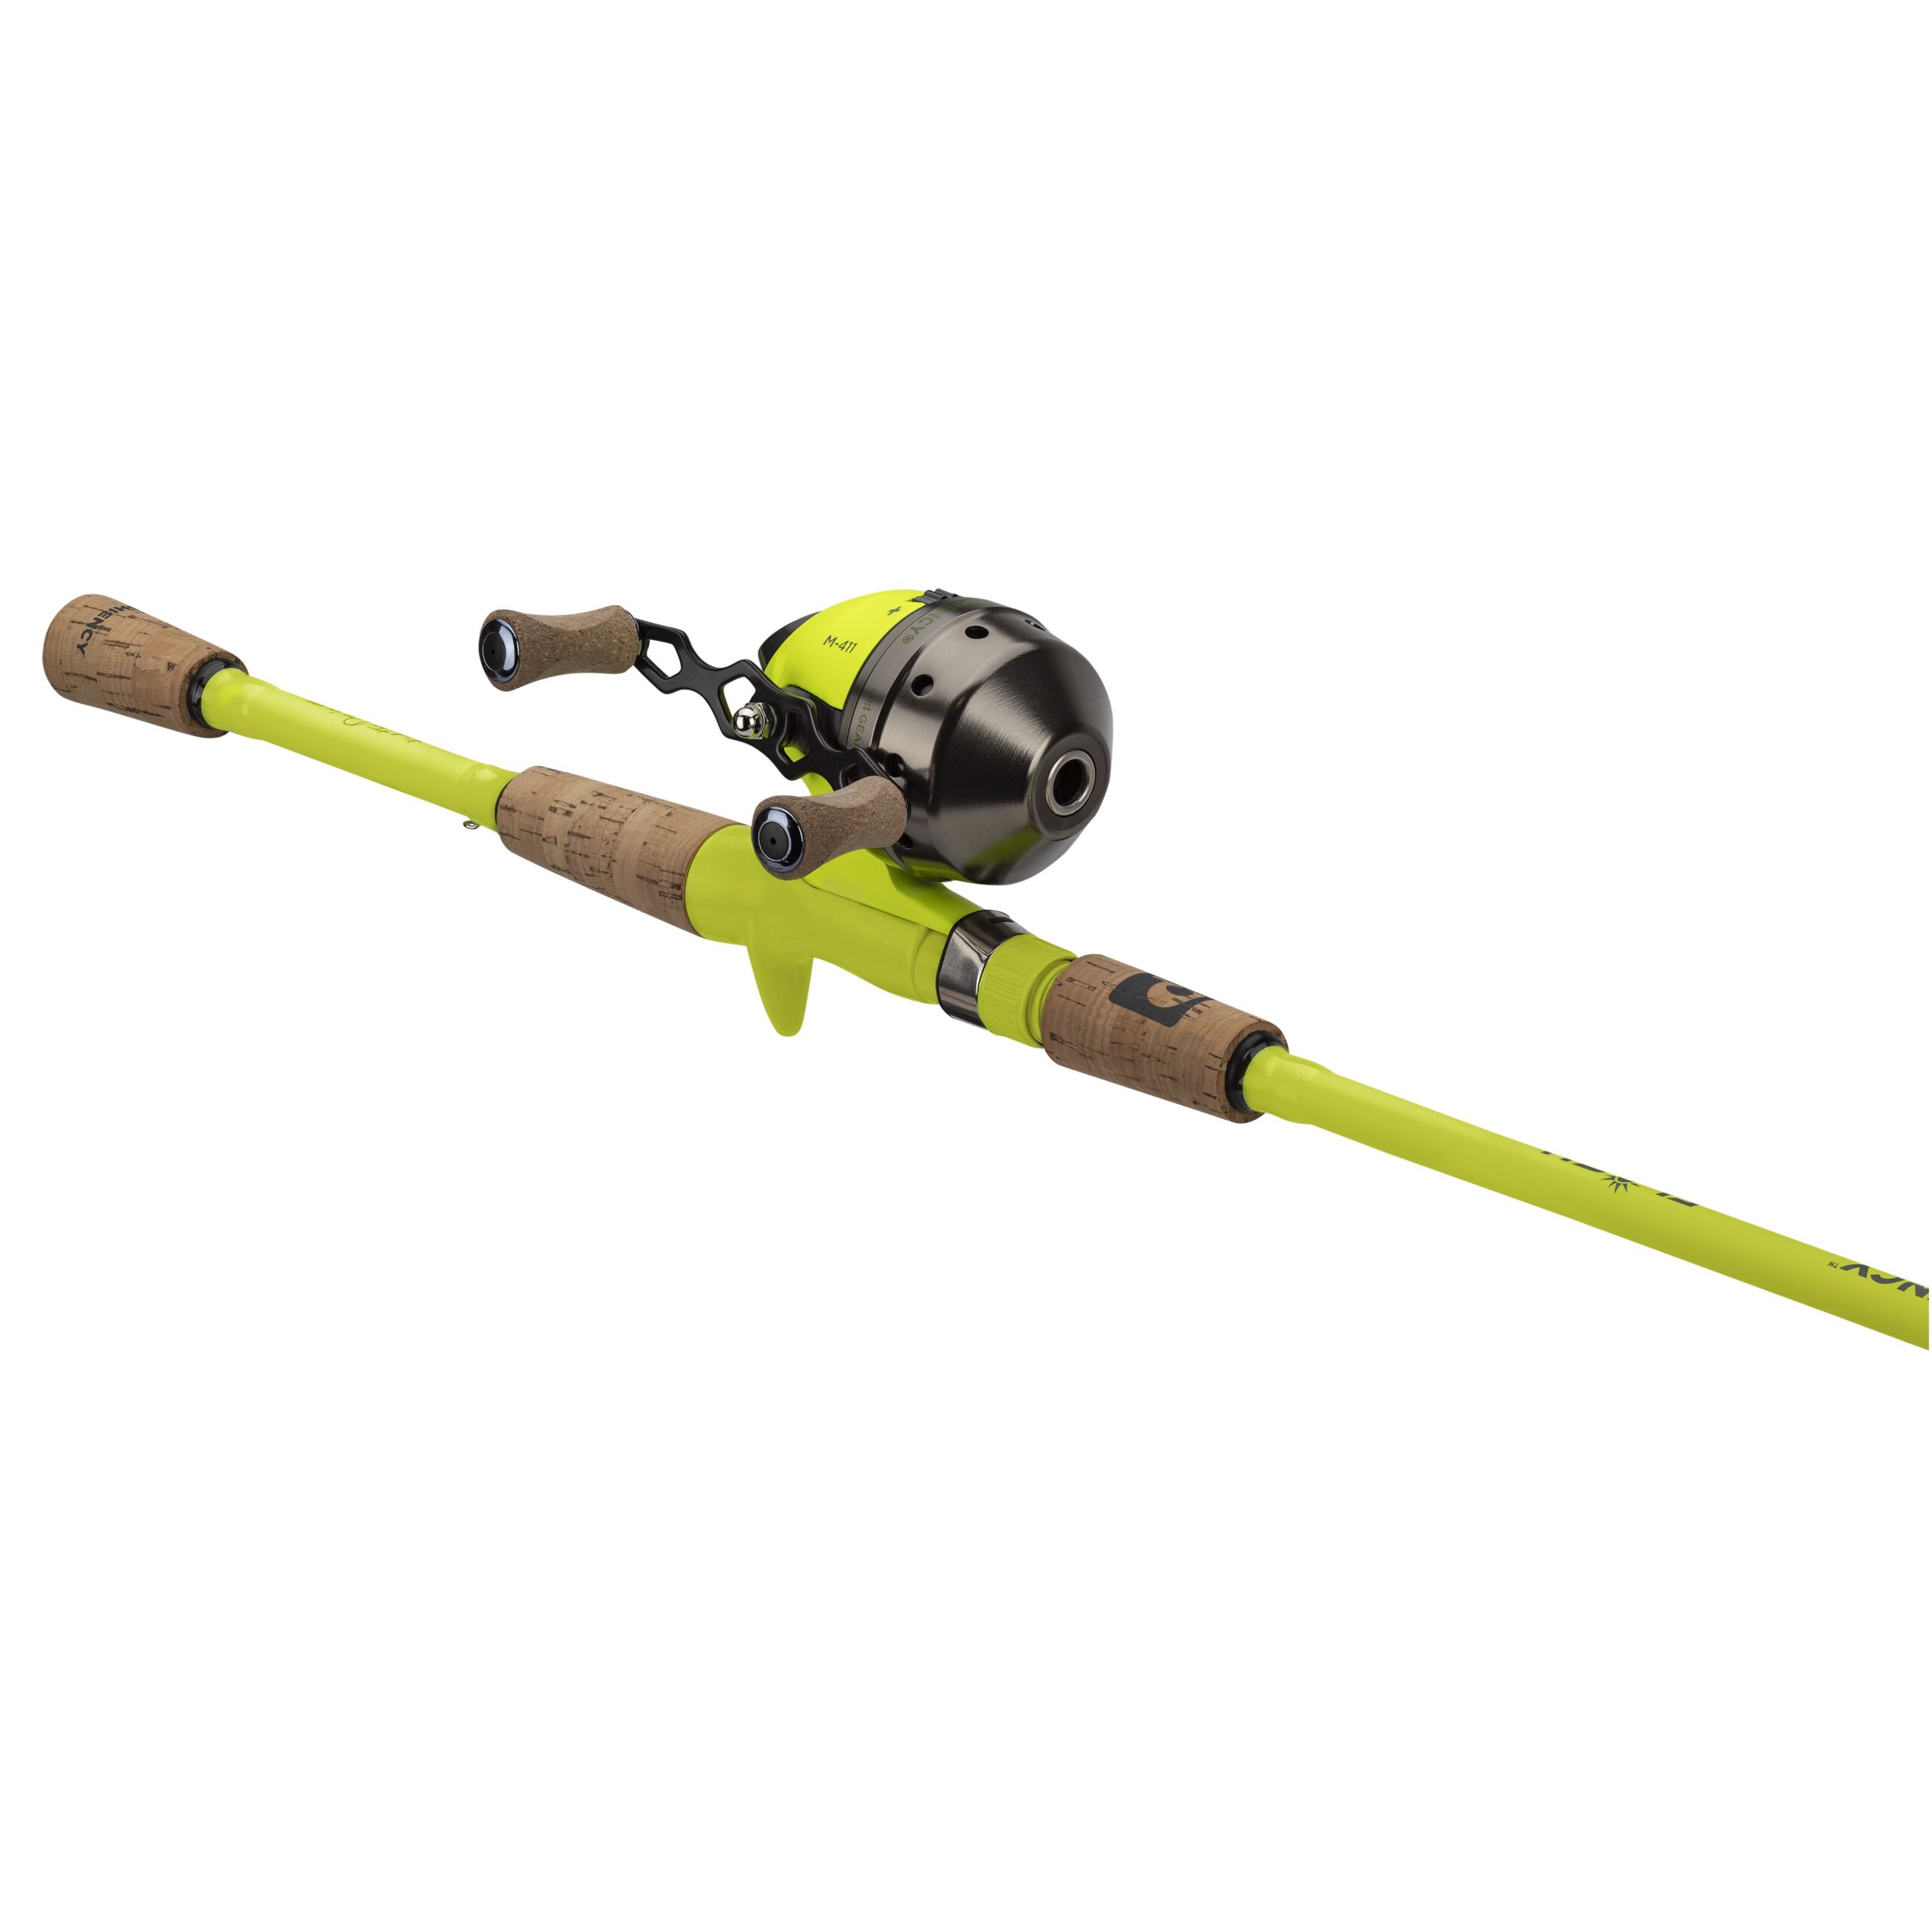 Profishiency Micro Telescopic Spinning Rod and Reel Combo - 5ft